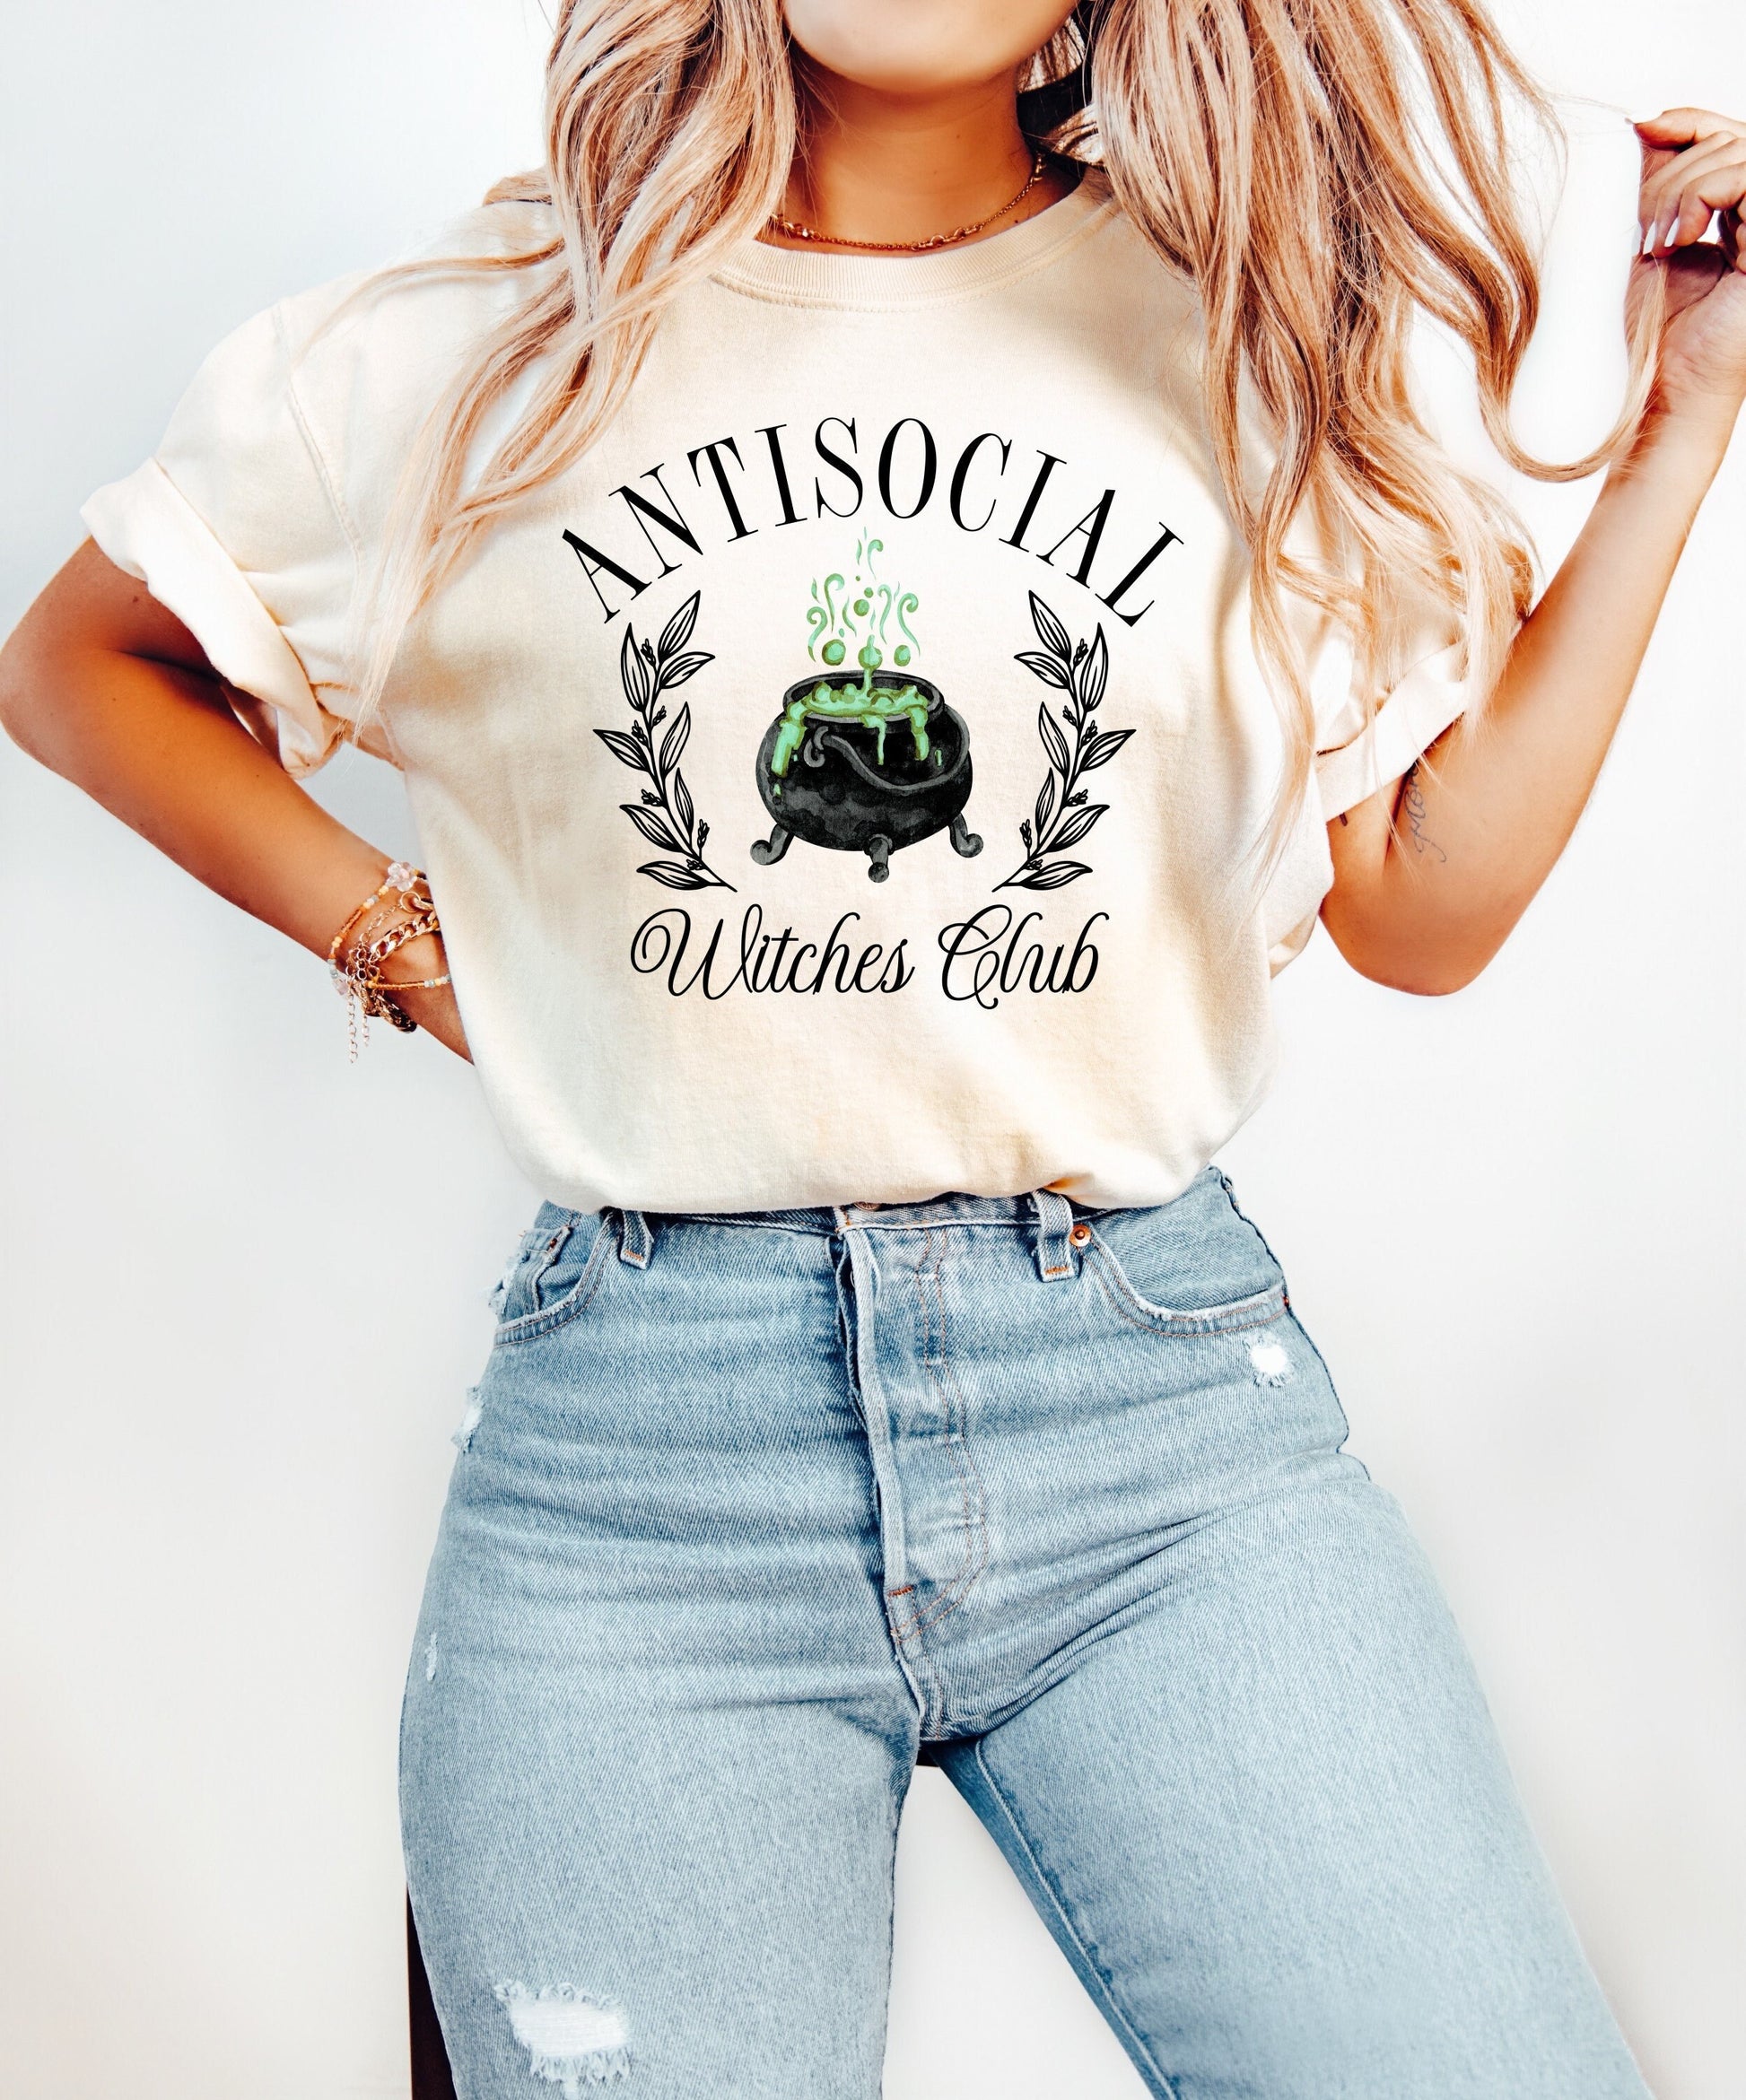 Antisocial Witches Club Halloween Shirt, Cute Witch Halloween Shirt, Halloween Shirts, Spooky Season Shirt, Witches Halloween Top